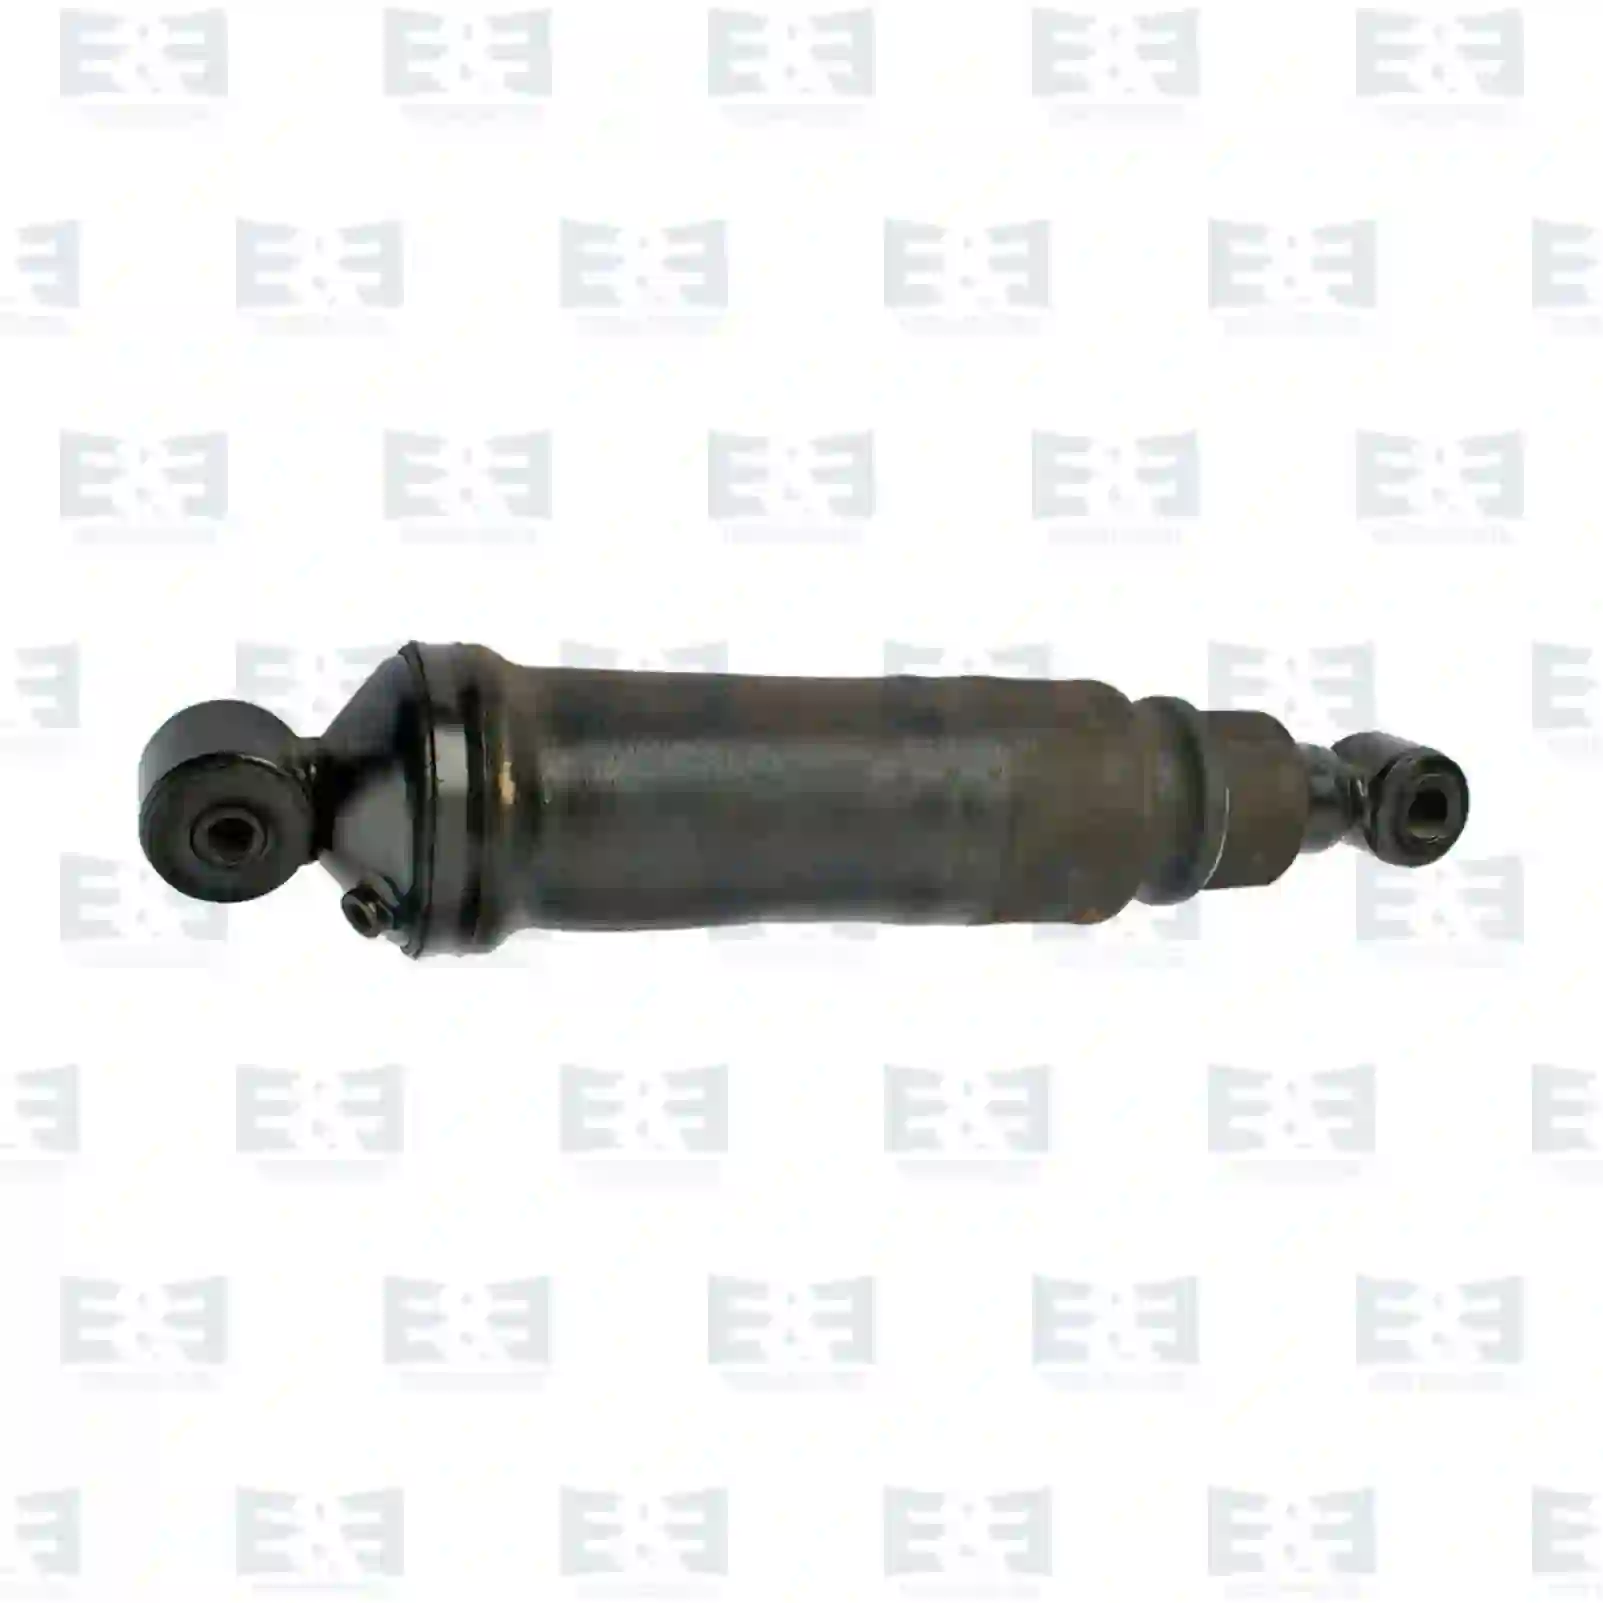 Cabin shock absorber, with air bellow, 2E2276379, 1629719, 1629724, 3172984, , , ||  2E2276379 E&E Truck Spare Parts | Truck Spare Parts, Auotomotive Spare Parts Cabin shock absorber, with air bellow, 2E2276379, 1629719, 1629724, 3172984, , , ||  2E2276379 E&E Truck Spare Parts | Truck Spare Parts, Auotomotive Spare Parts